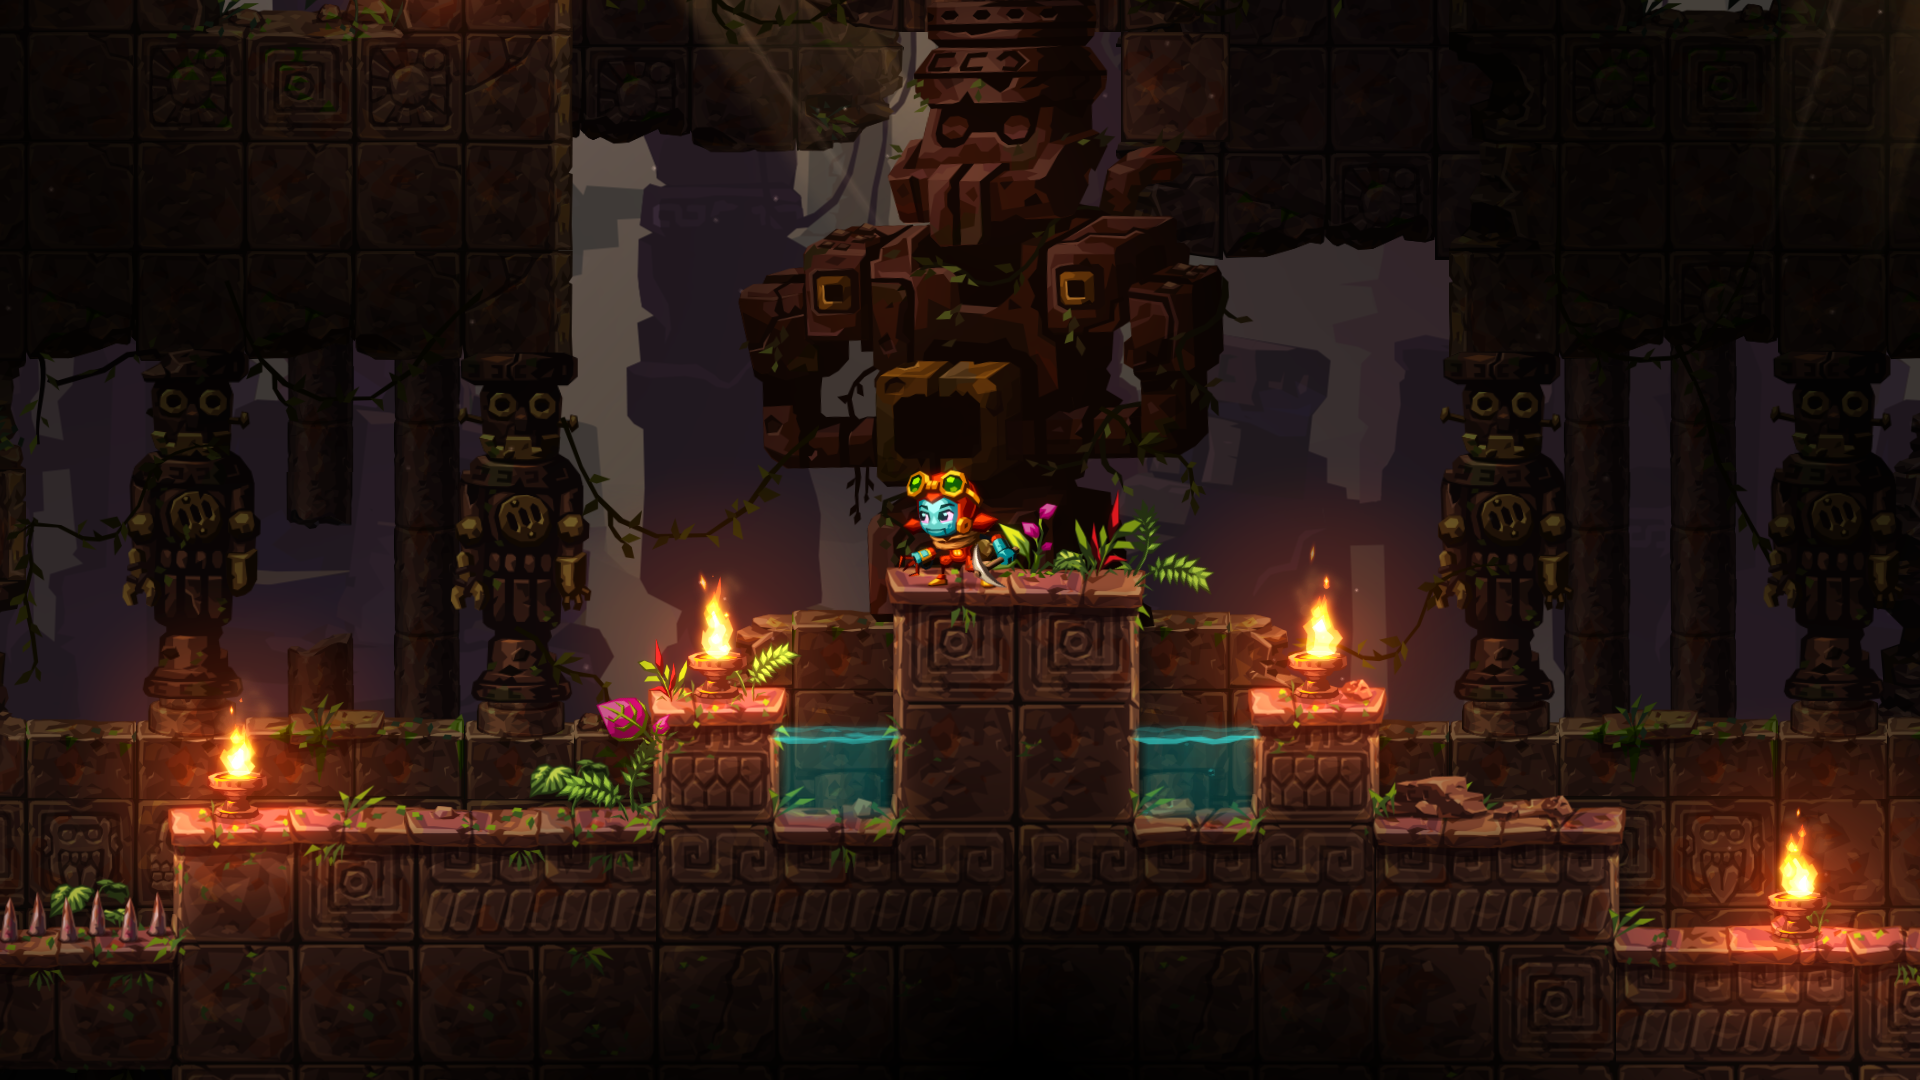 HD desktop wallpaper of SteamWorld Dig 2 featuring a robotic character exploring an underground temple with torches and ancient statues.